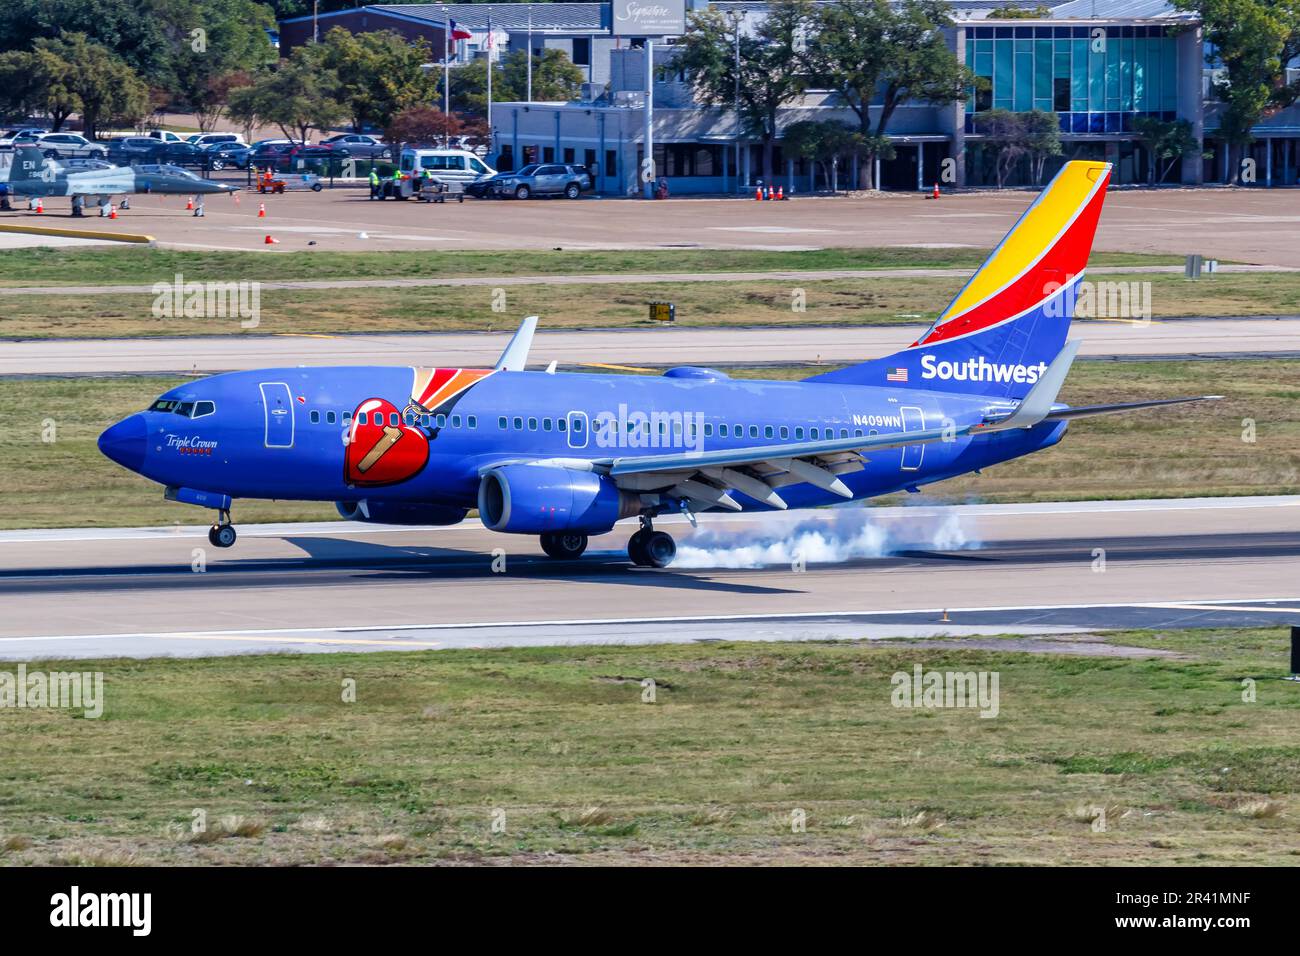 Southwest Boeing 737-700 aircraft Dallas Love Field airport in the USA Triple Crown One special livery Stock Photo